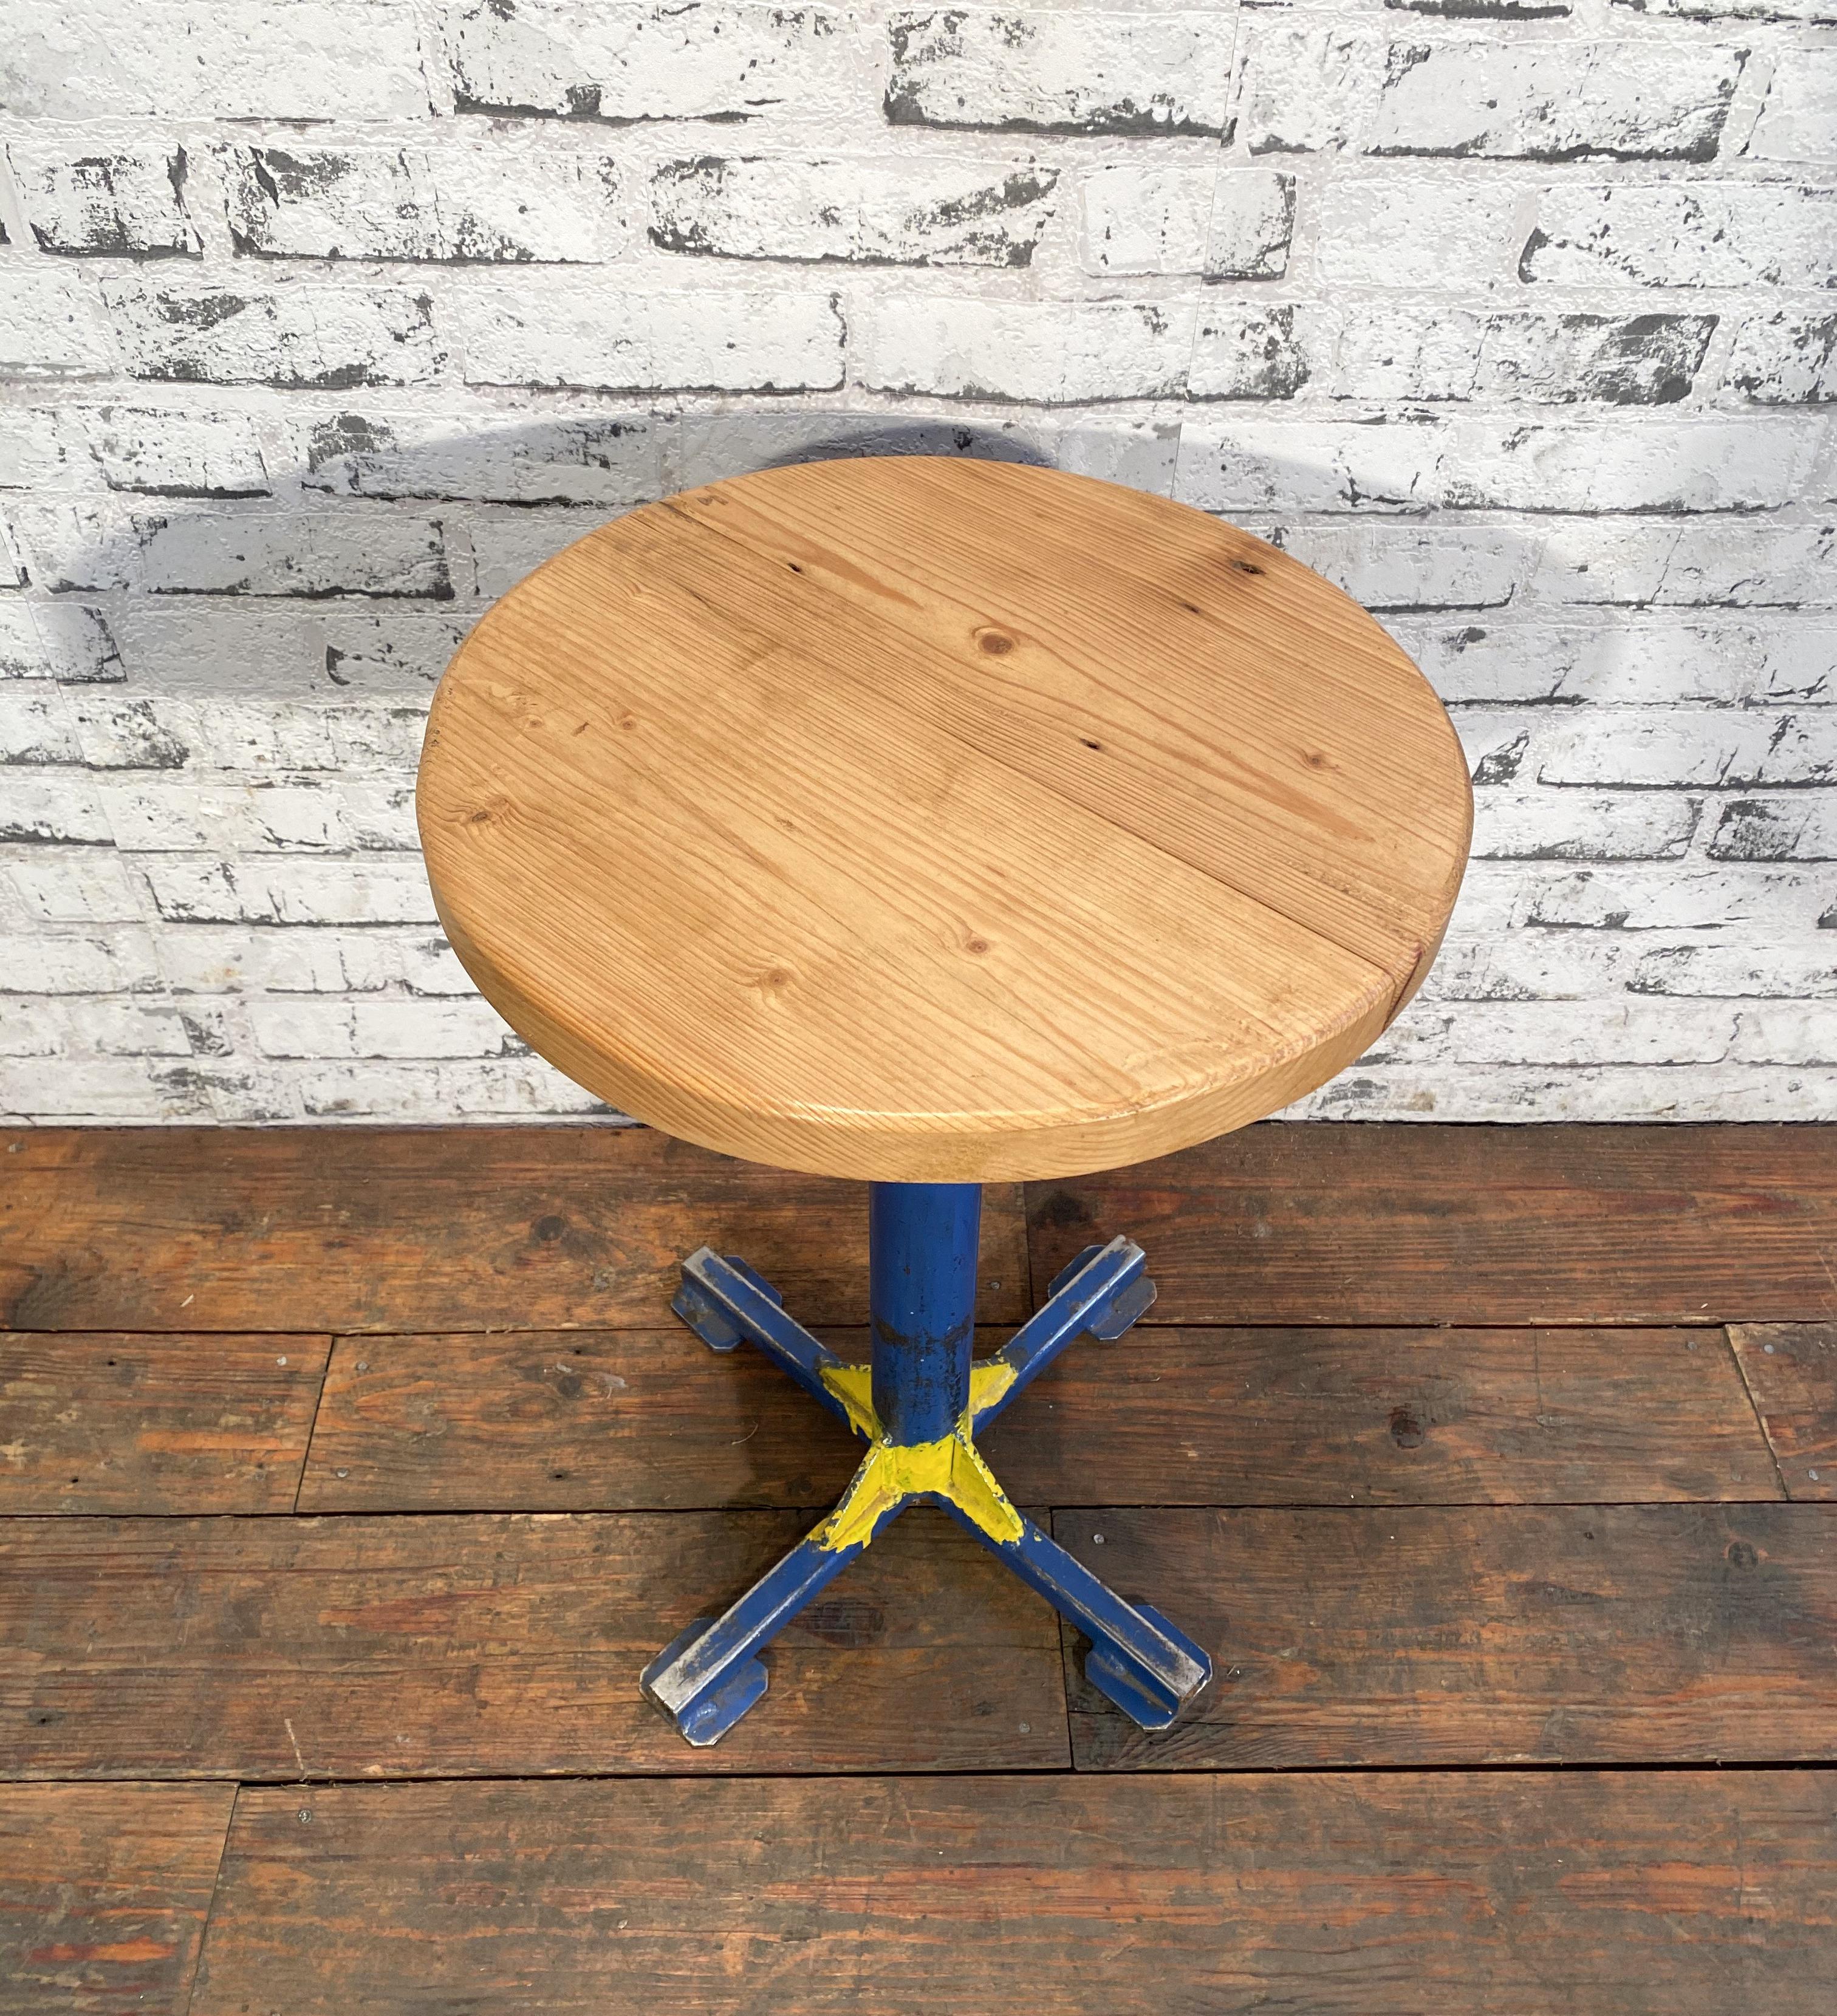 Vintage industrial stool. It features a blue iron leg and a solid wooden seat.